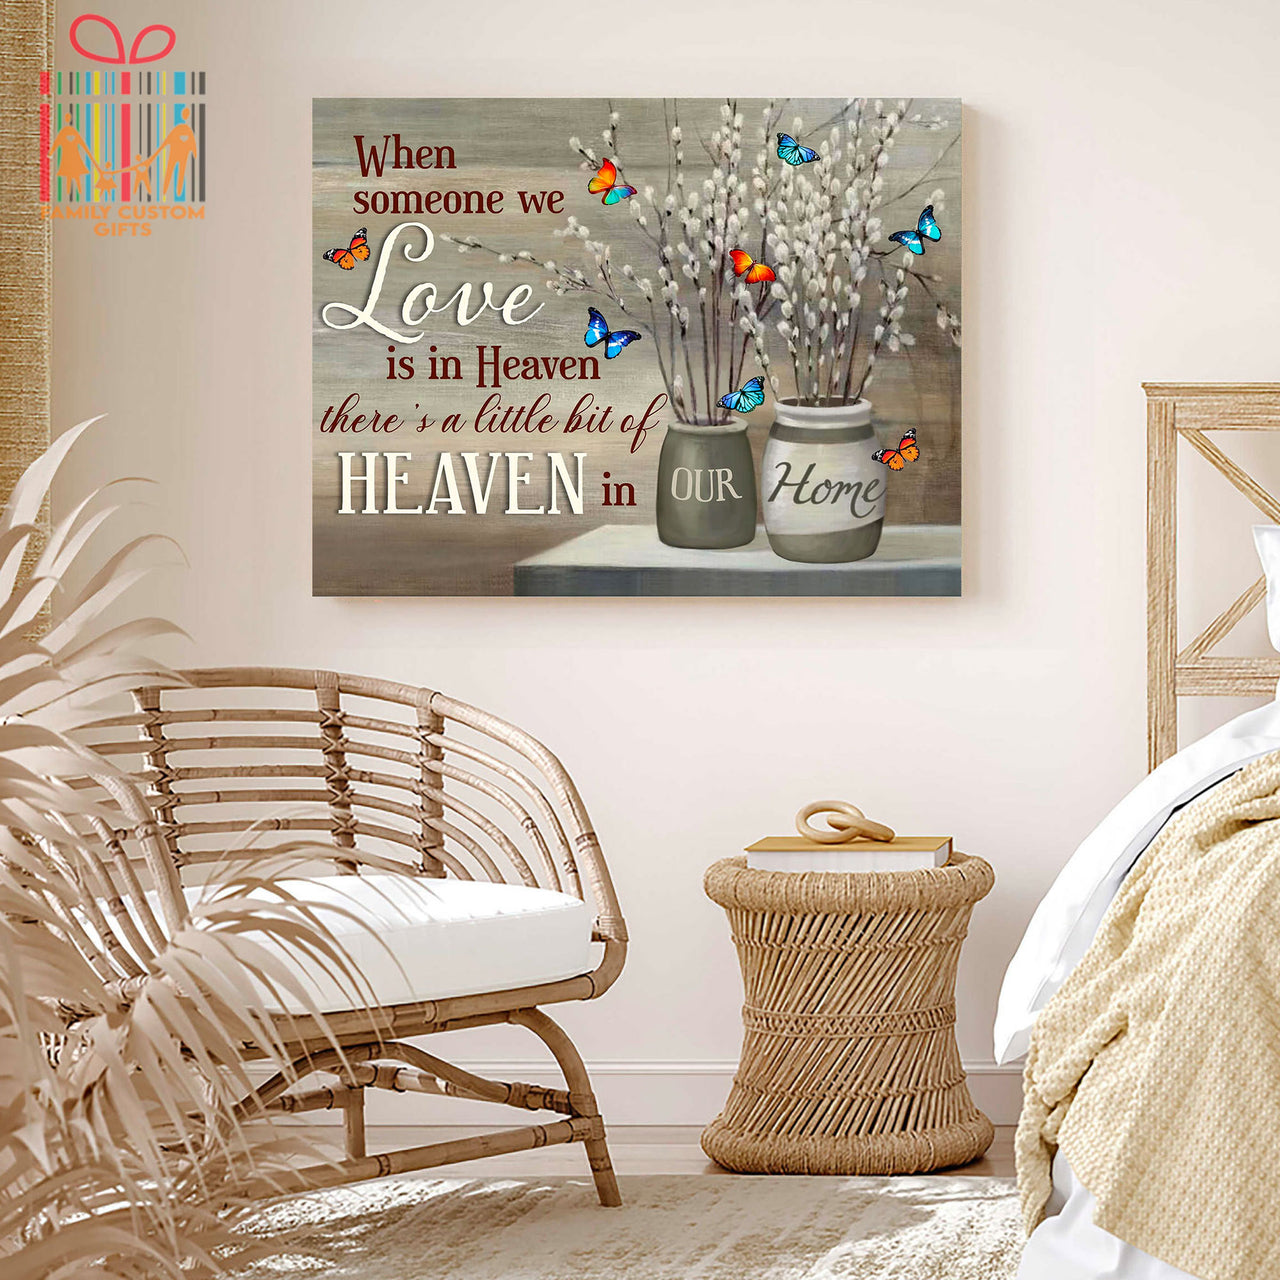 Custom Poster Prints Because Someone We Love is in Heaven Personalized Gifts Wall Decor